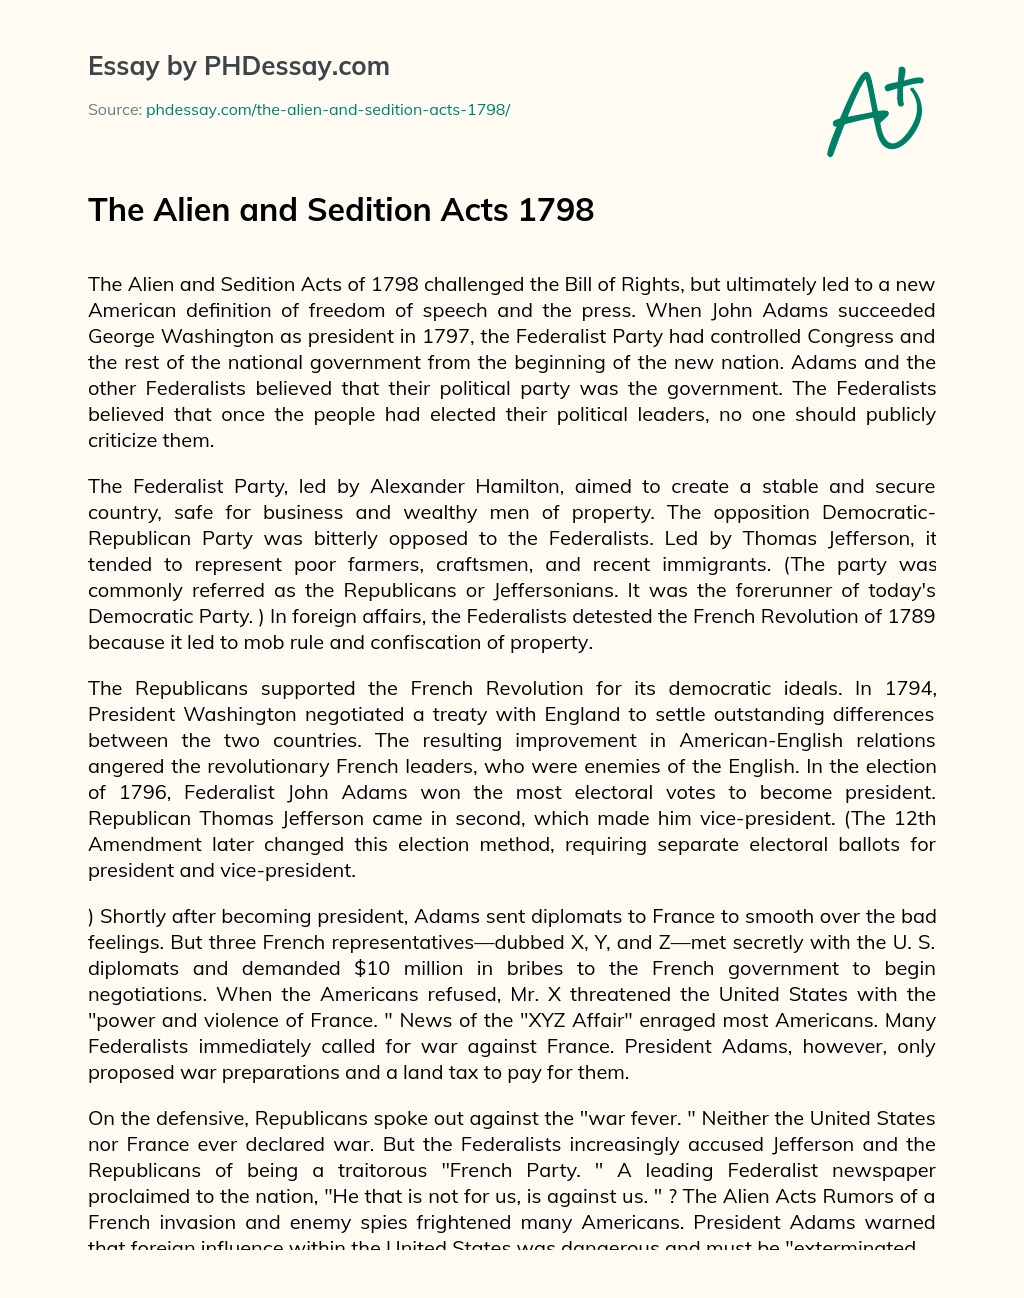 The Alien and Sedition Acts 1798 essay